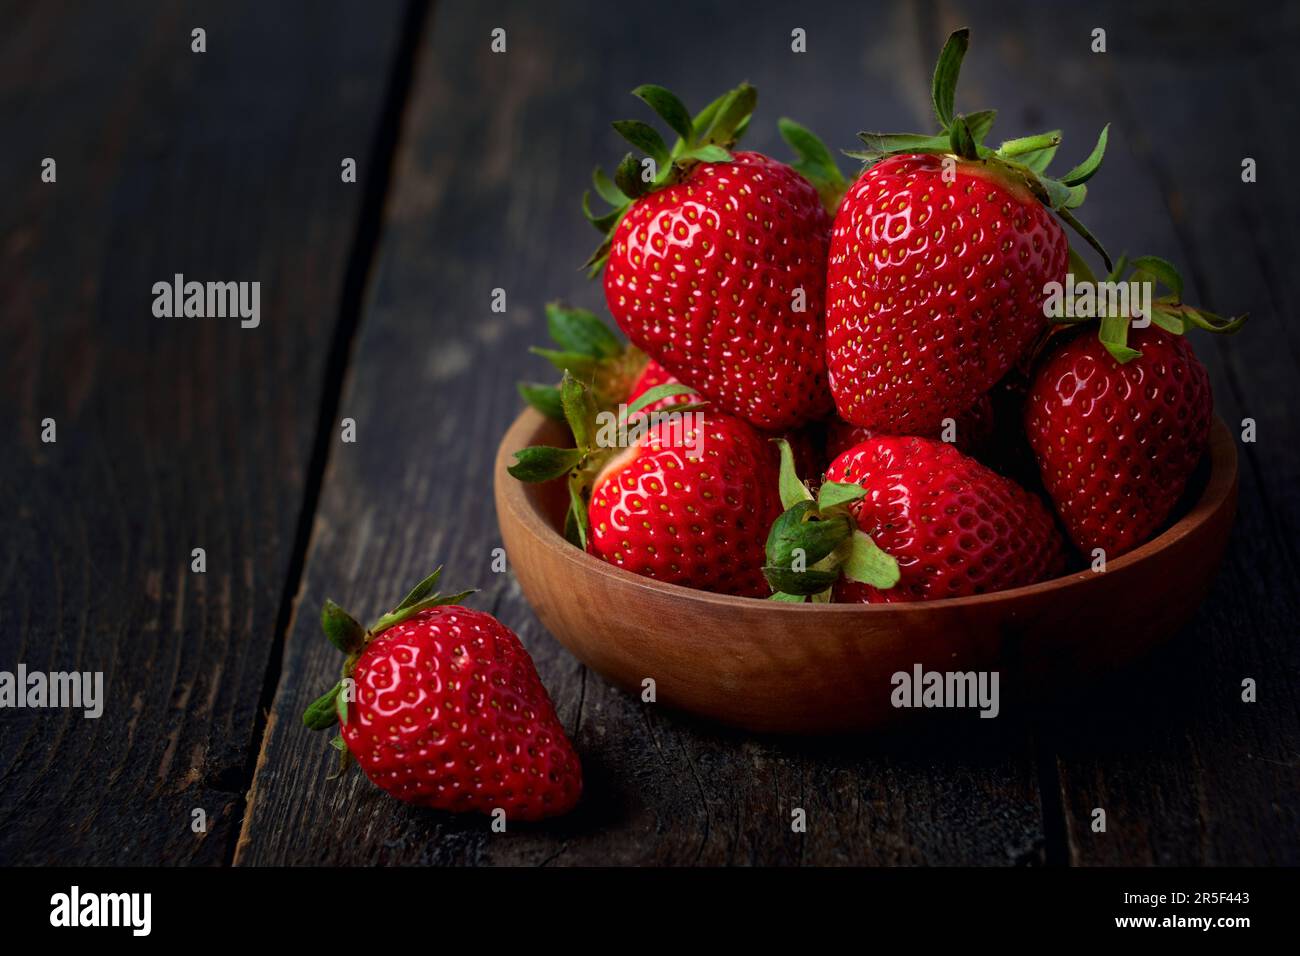 Berries of red strawberries in a wooden bowl on a dark wooden table Stock Photo